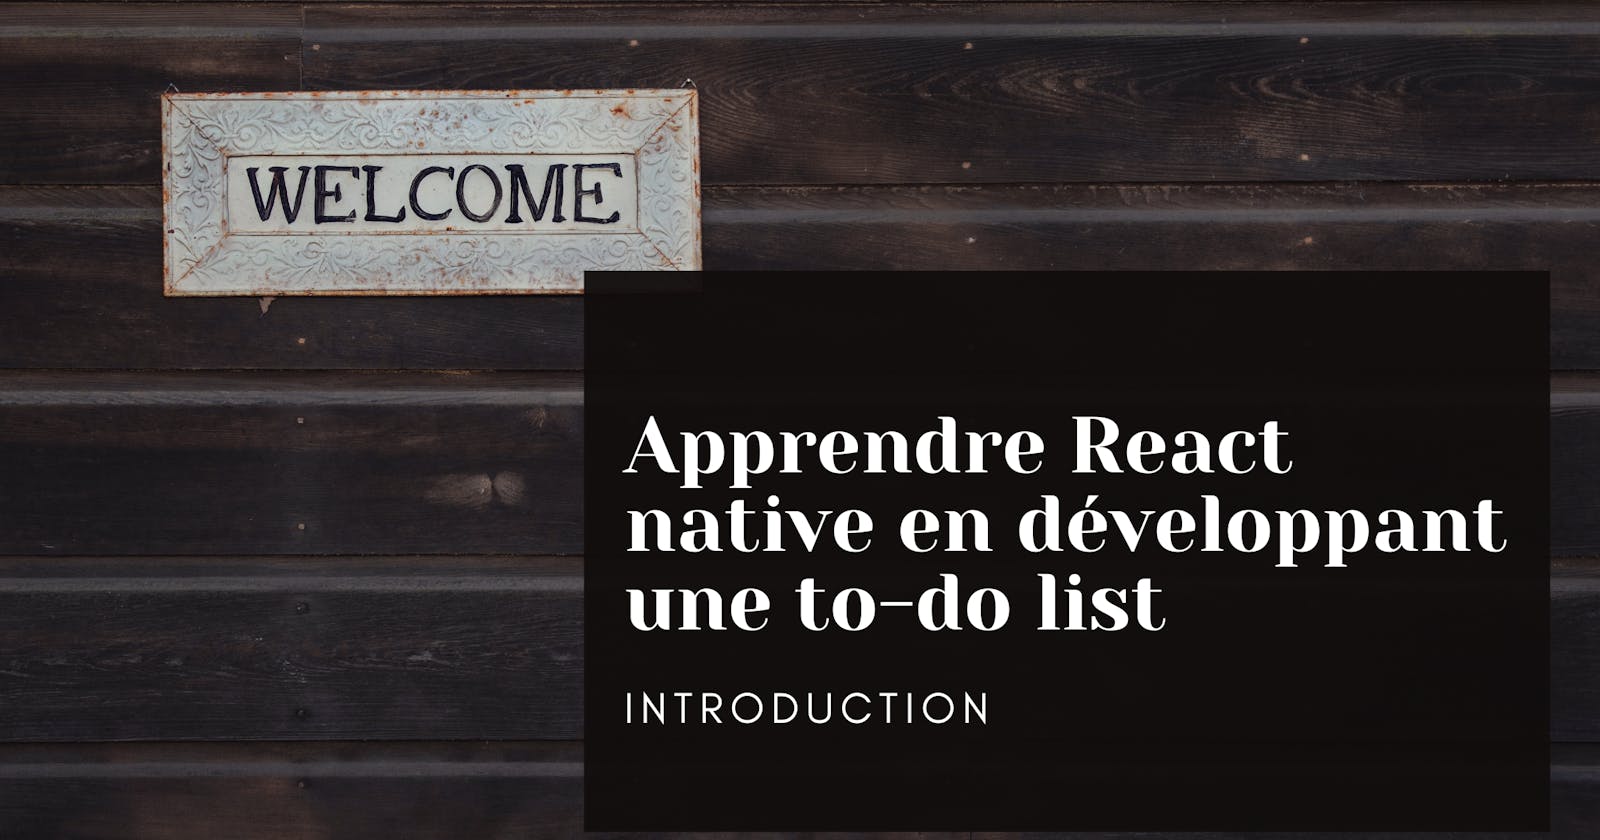 Apprendre React Native: Introduction